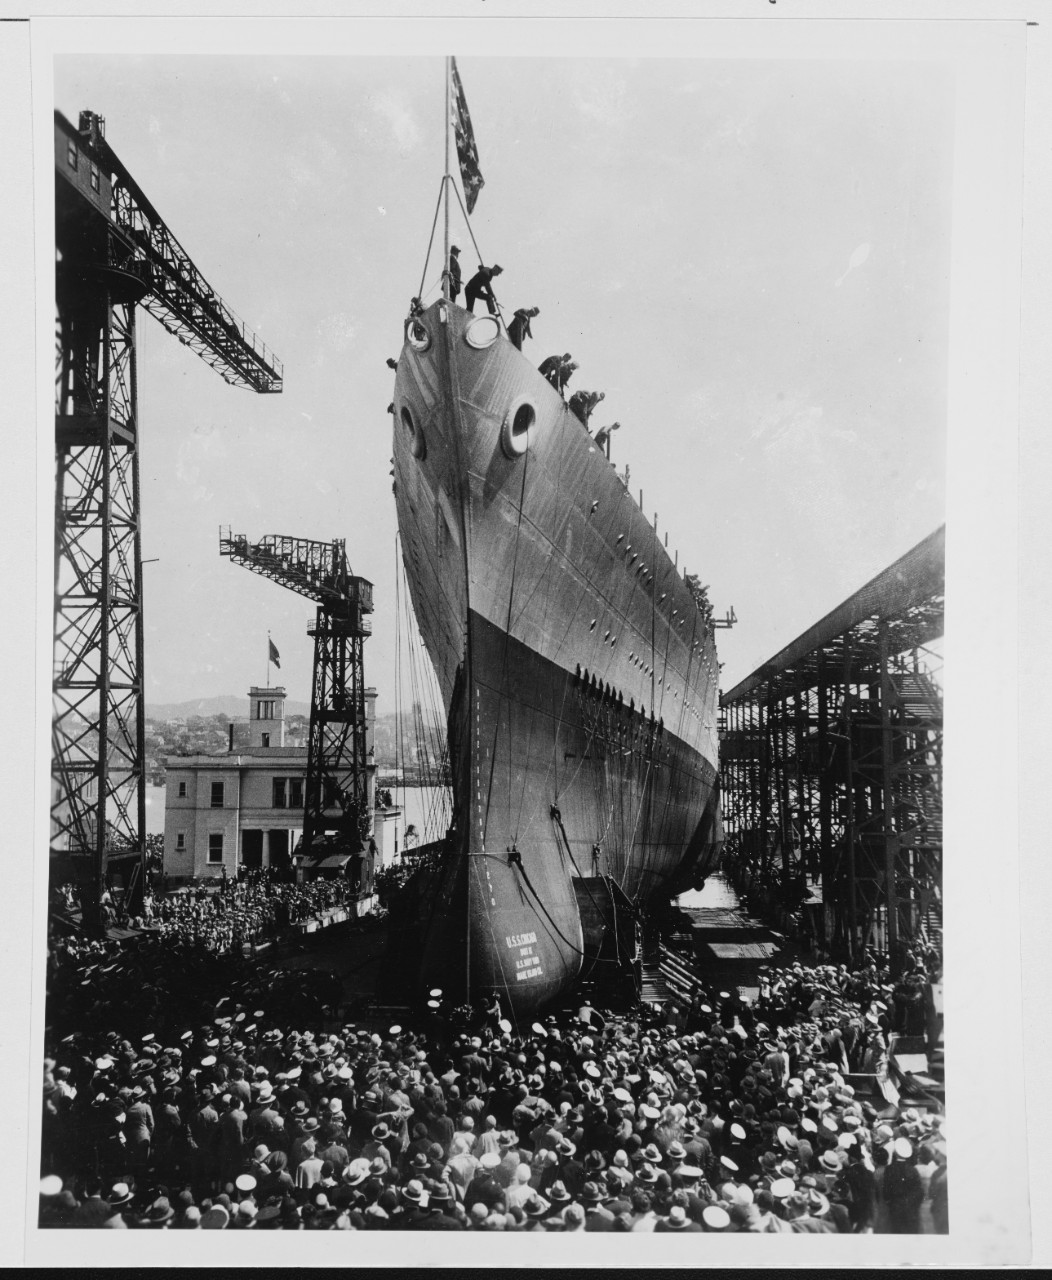 Chicago is launched at Mare Island Navy Yard, 10 April 1930. (Naval History and Heritage Command Photograph NH 70790)